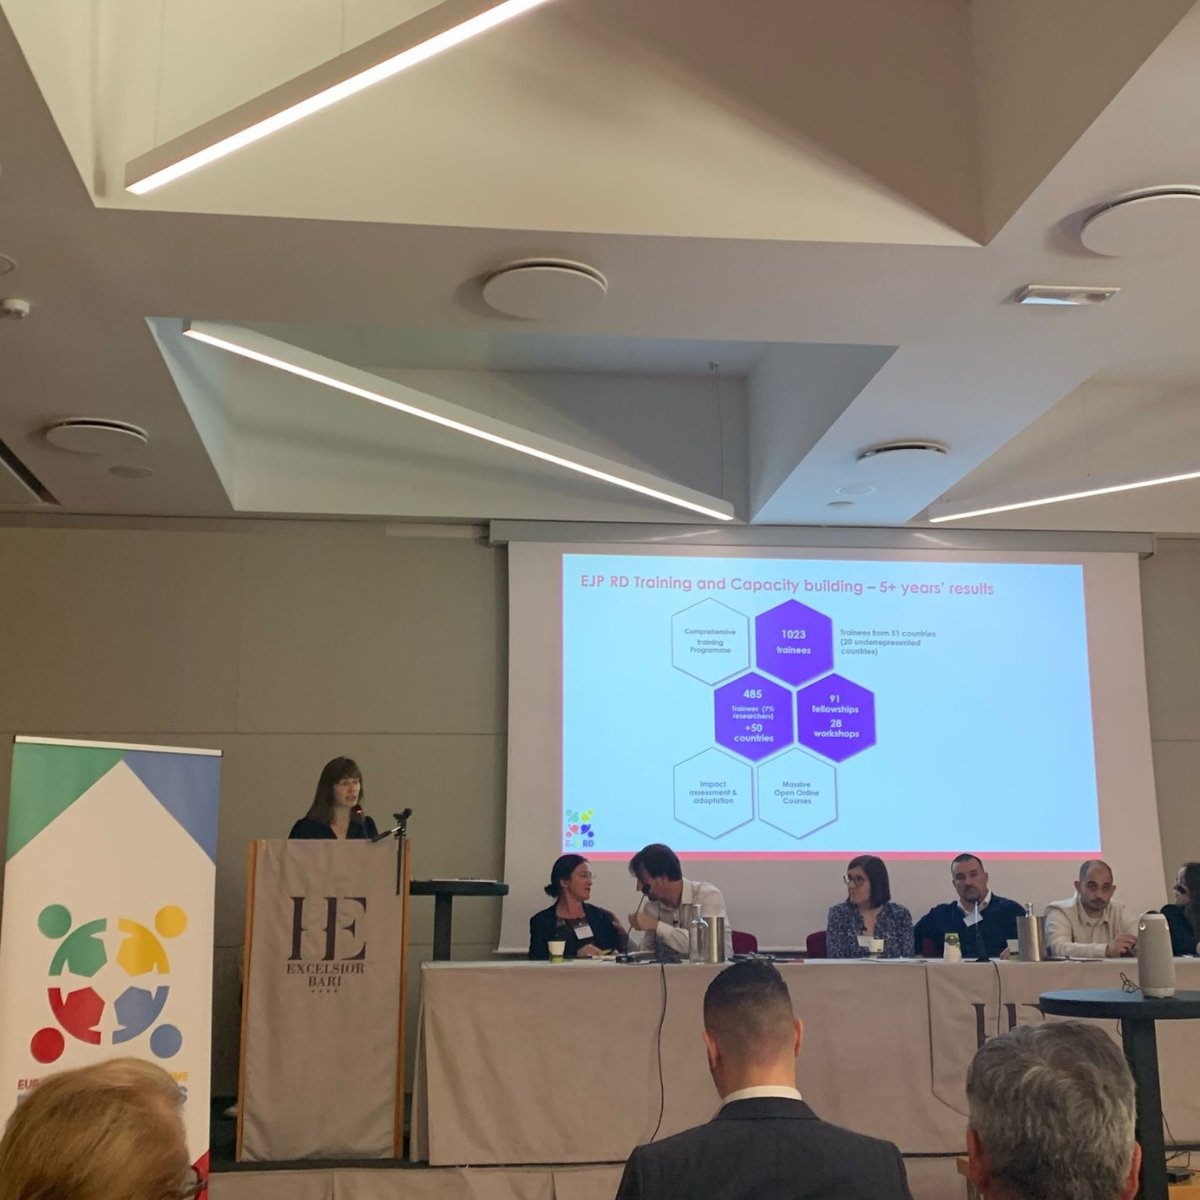 The Final Conference of @EJPRareDiseases is taking place these days in Bari, Italy. We are excited about the participation of experts, professionals and enthusiasts who came in attendance or connected virtually from all over the world  #fgb #EJPRD #bari